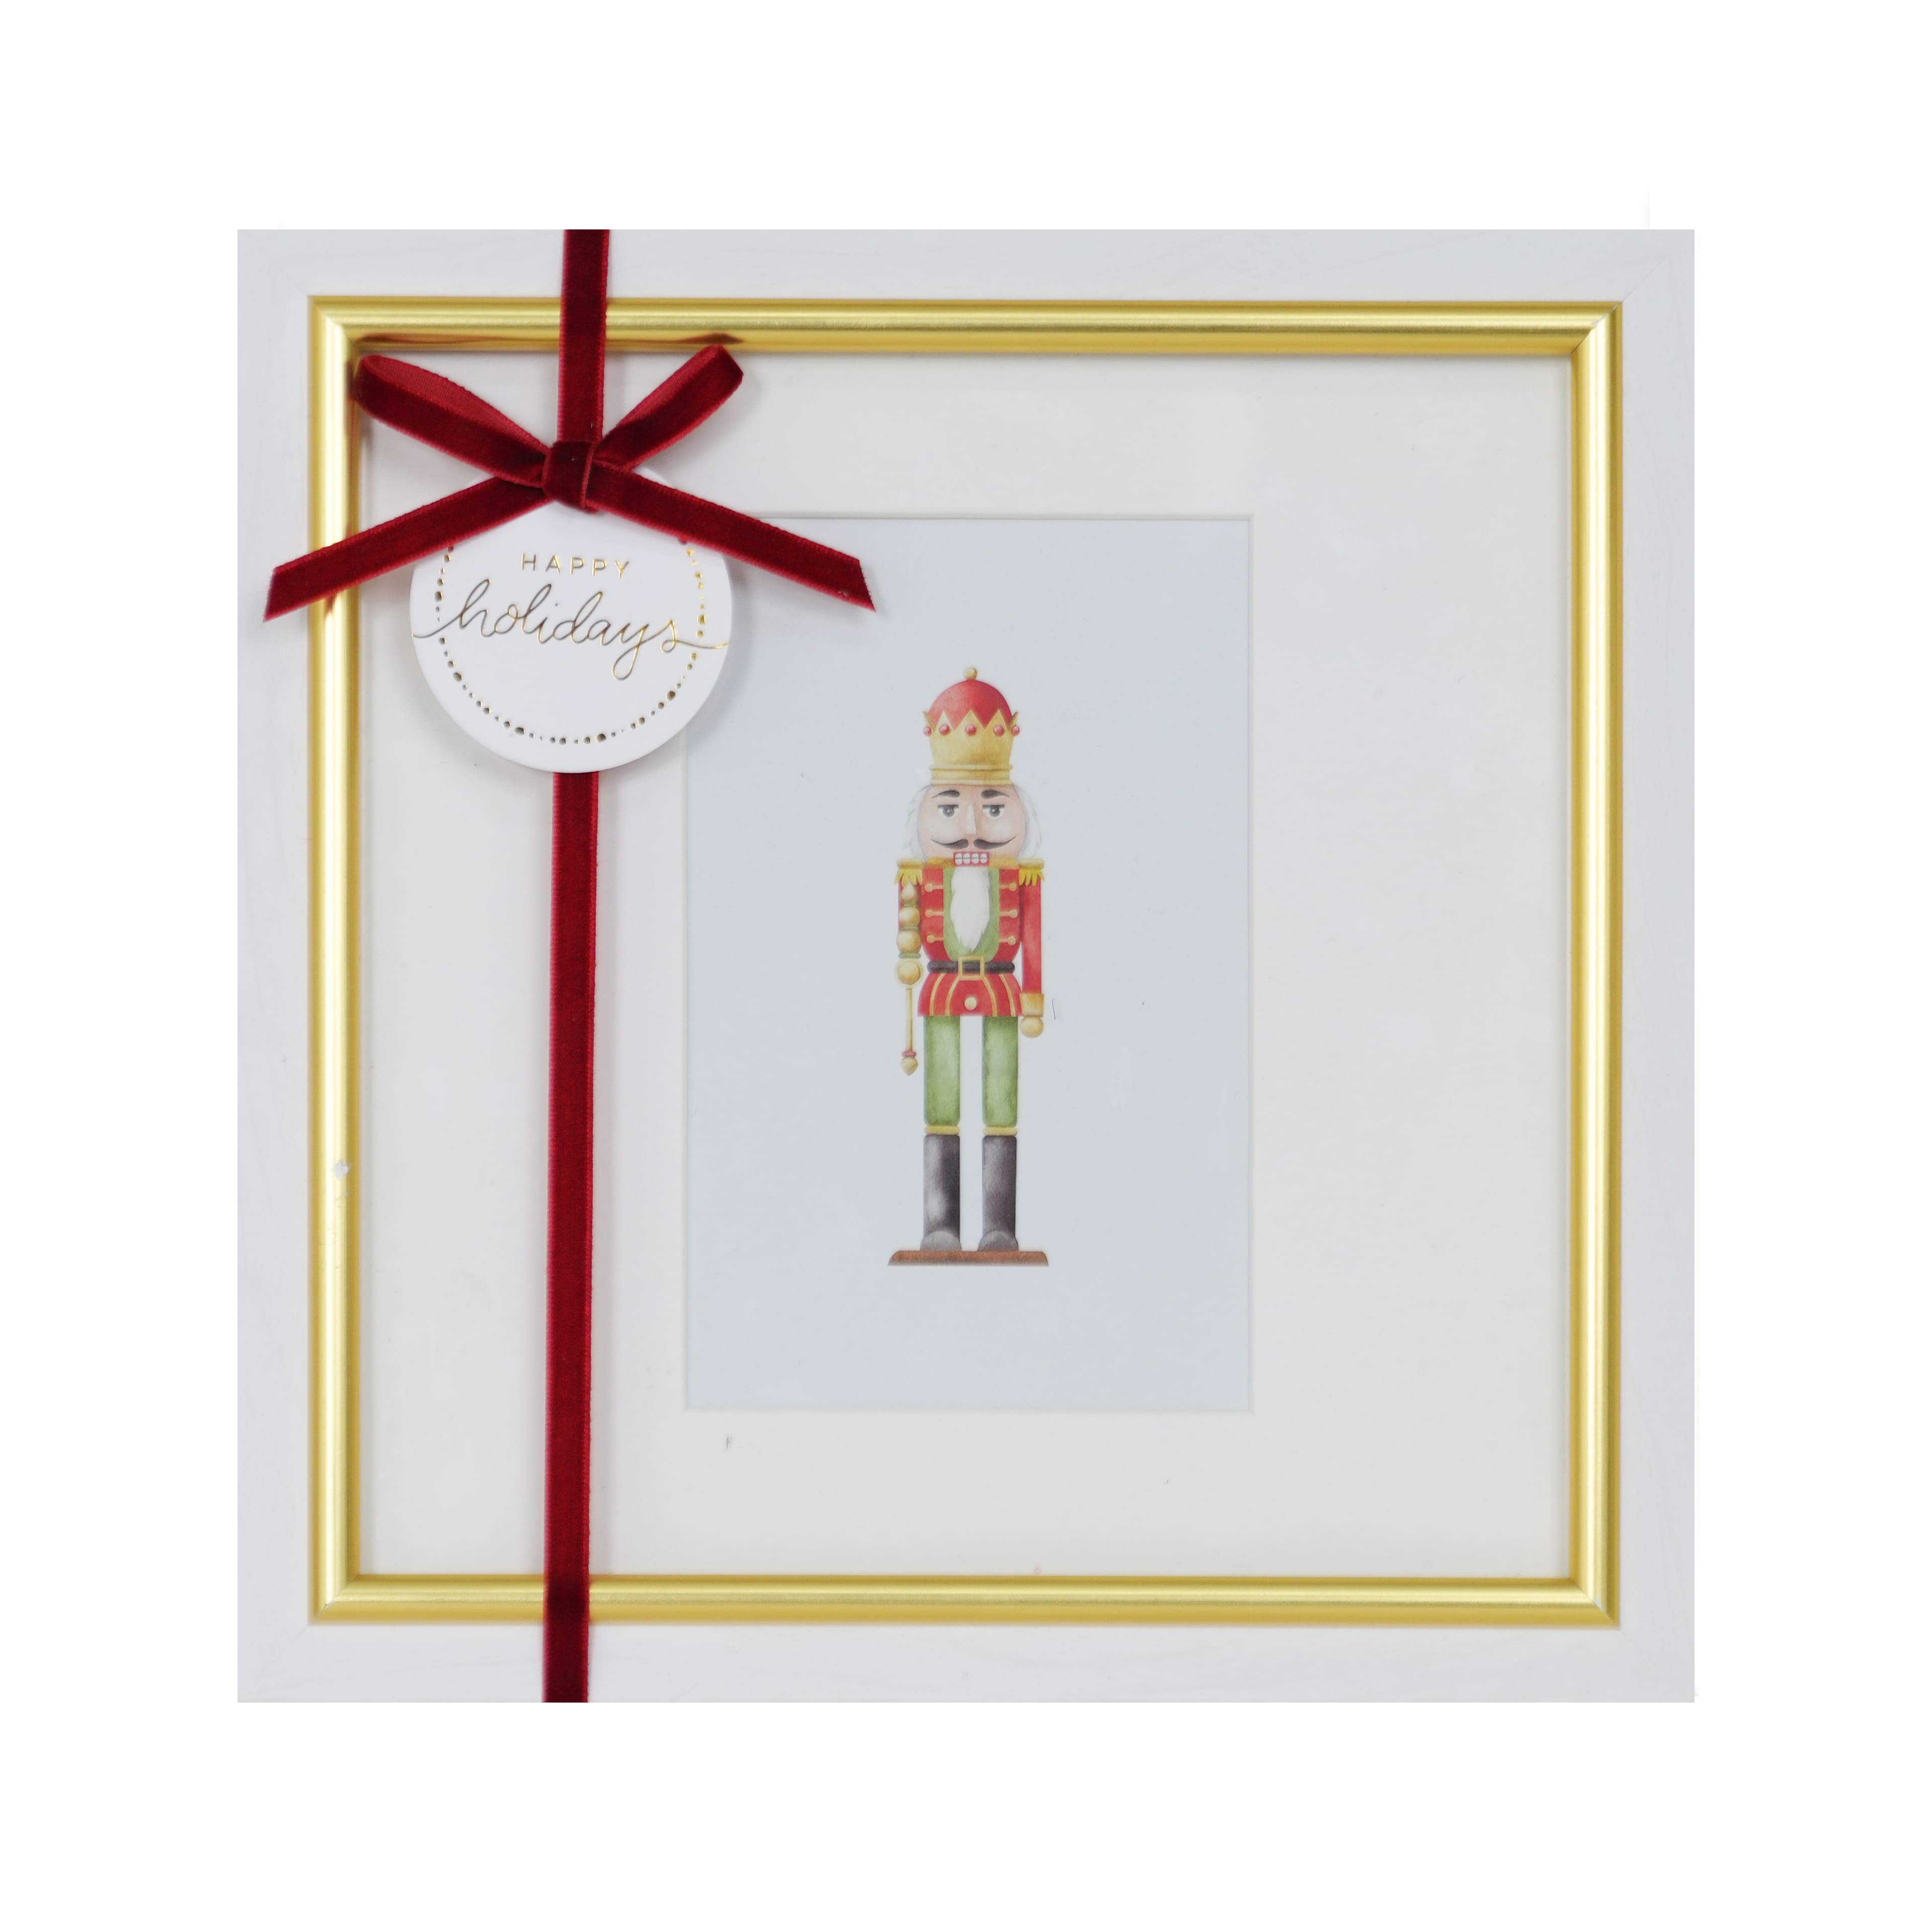 Shop Holiday Deals on Picture Frames